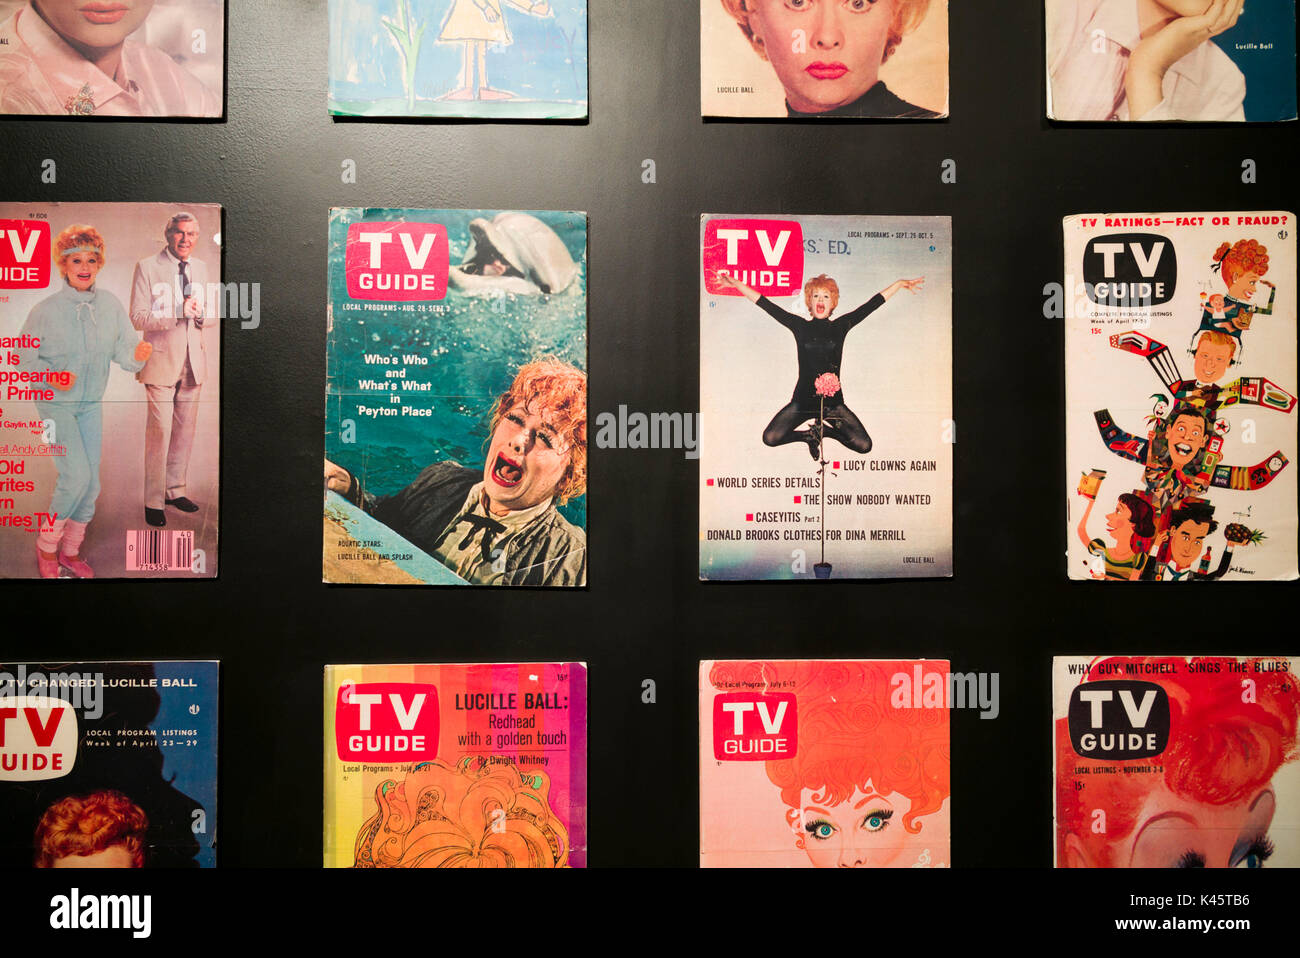 USA, New York, Western New York, Jamestown, Lucy-Desi Museum, dedicated to comedy star Lucille Ball of the 1950s-era TV show, I Love Lucy, TV Guide covers Stock Photo